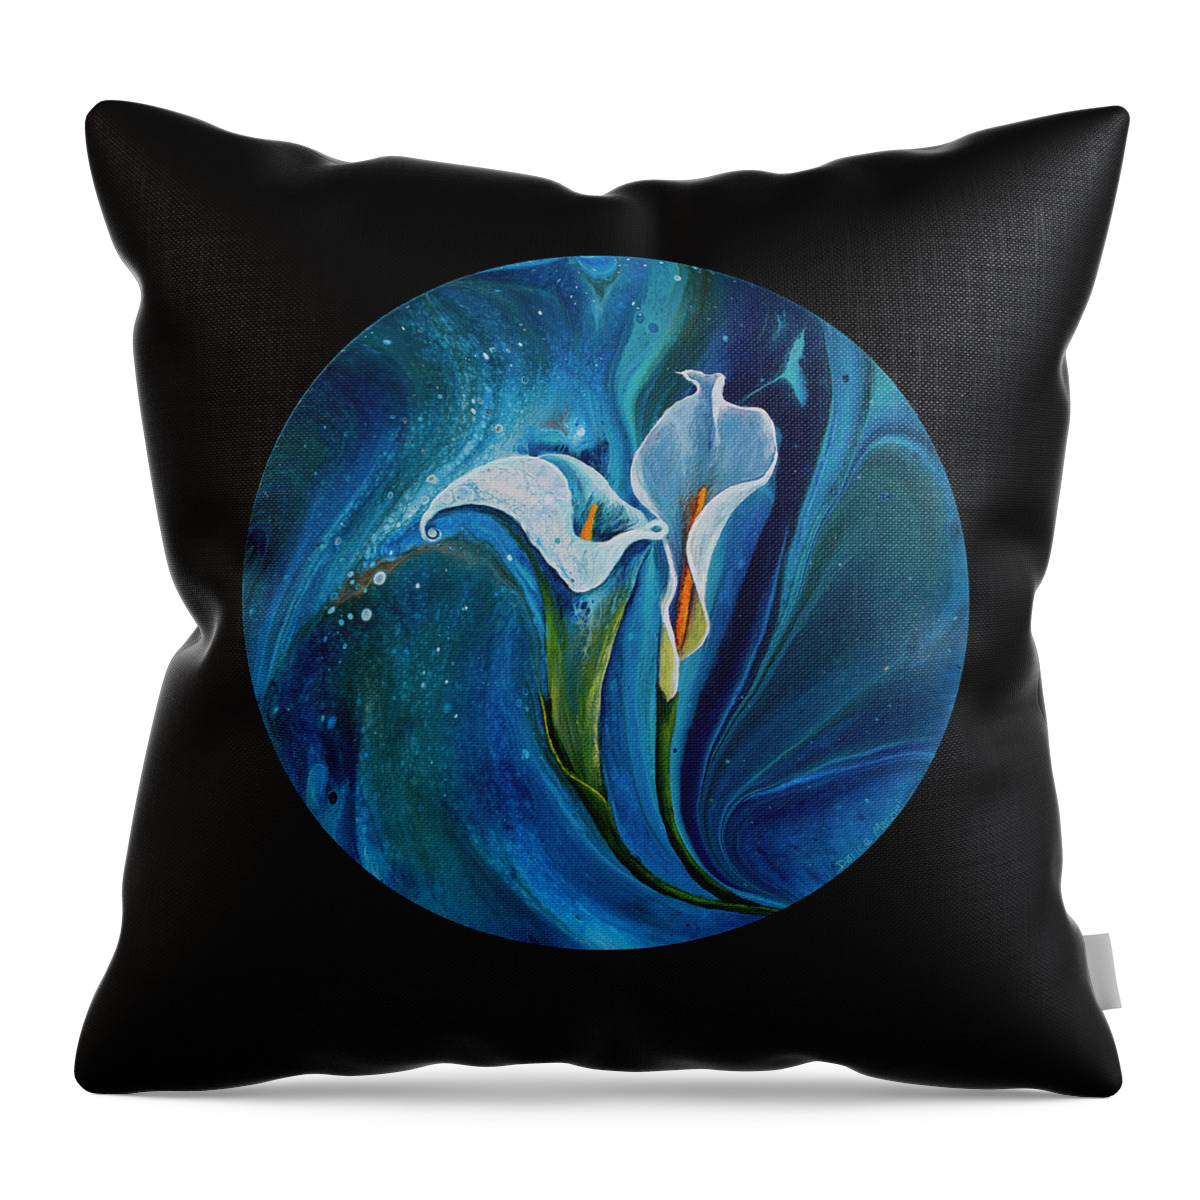 Calla Lily Throw Pillow featuring the painting Calla Lily by Darice Machel McGuire